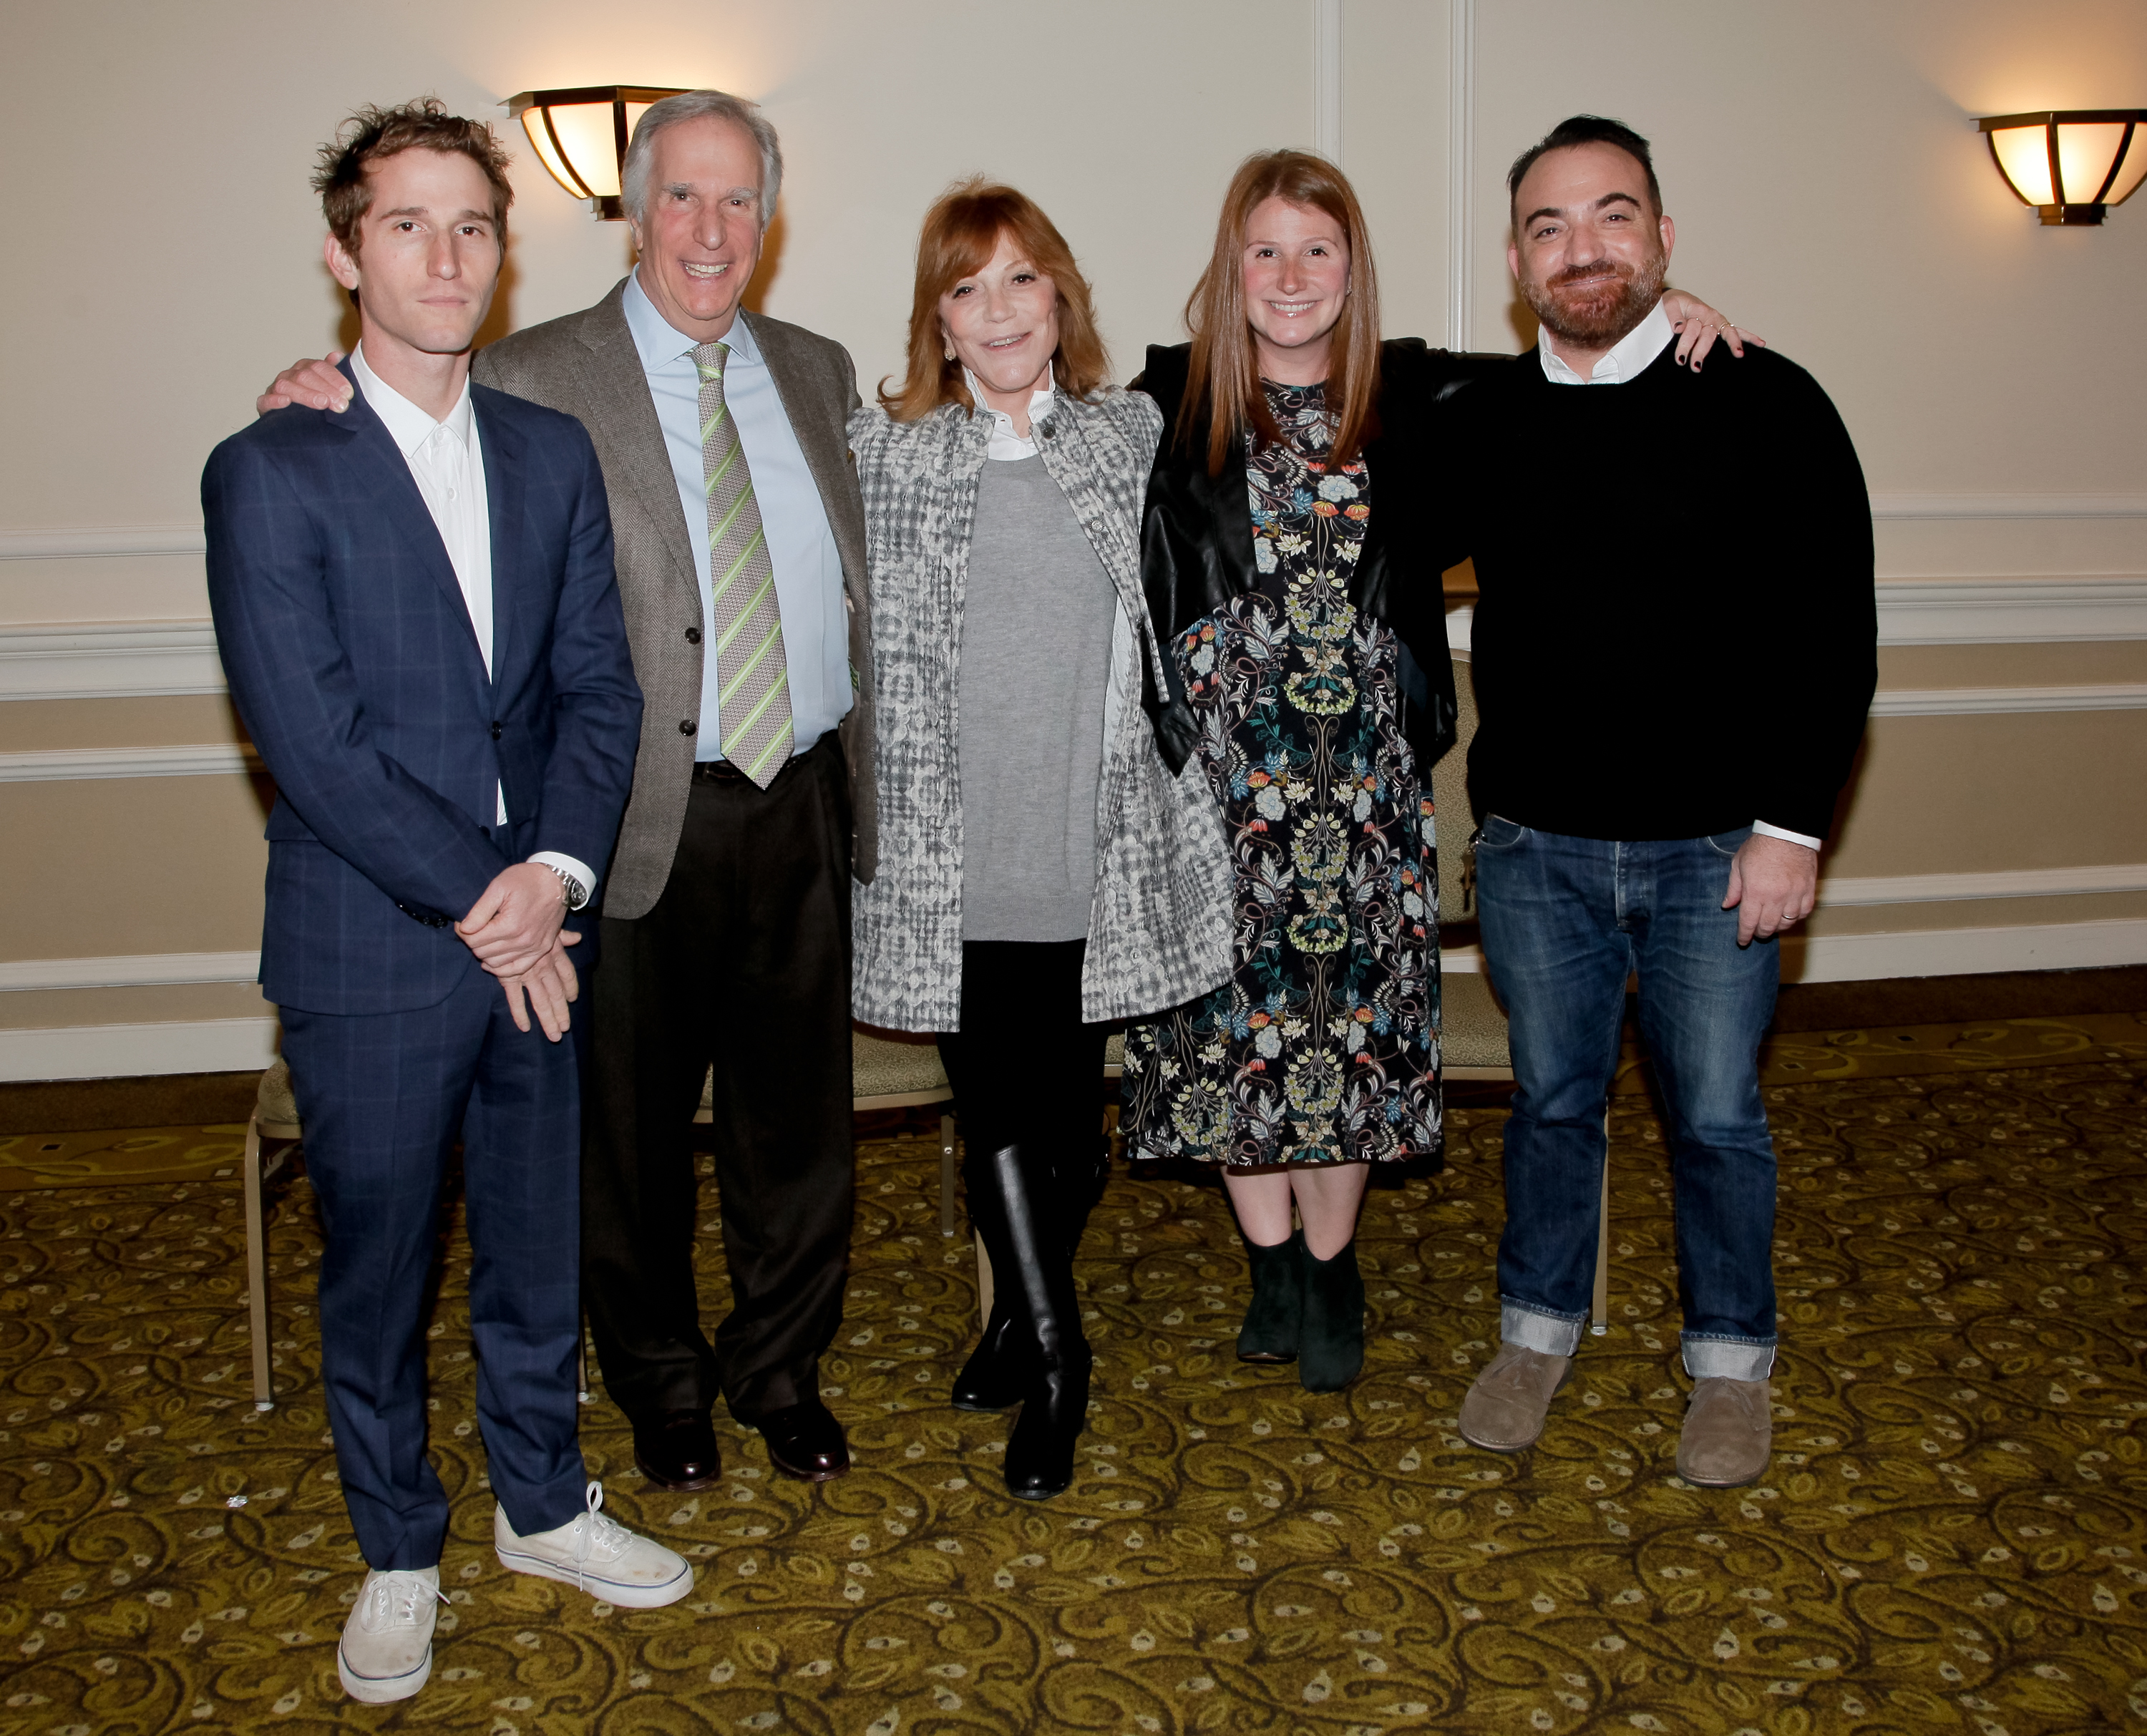 Max Winkler, Henry Winkler, Stacey Winkler, Zoe Winkler, and Jed Weitzman honoring Winkler  as he received the Pacific Pioneer Broadcasters Lifetime Achievement Award on January 29, 2016 in Studio City, California | Source: Getty Images